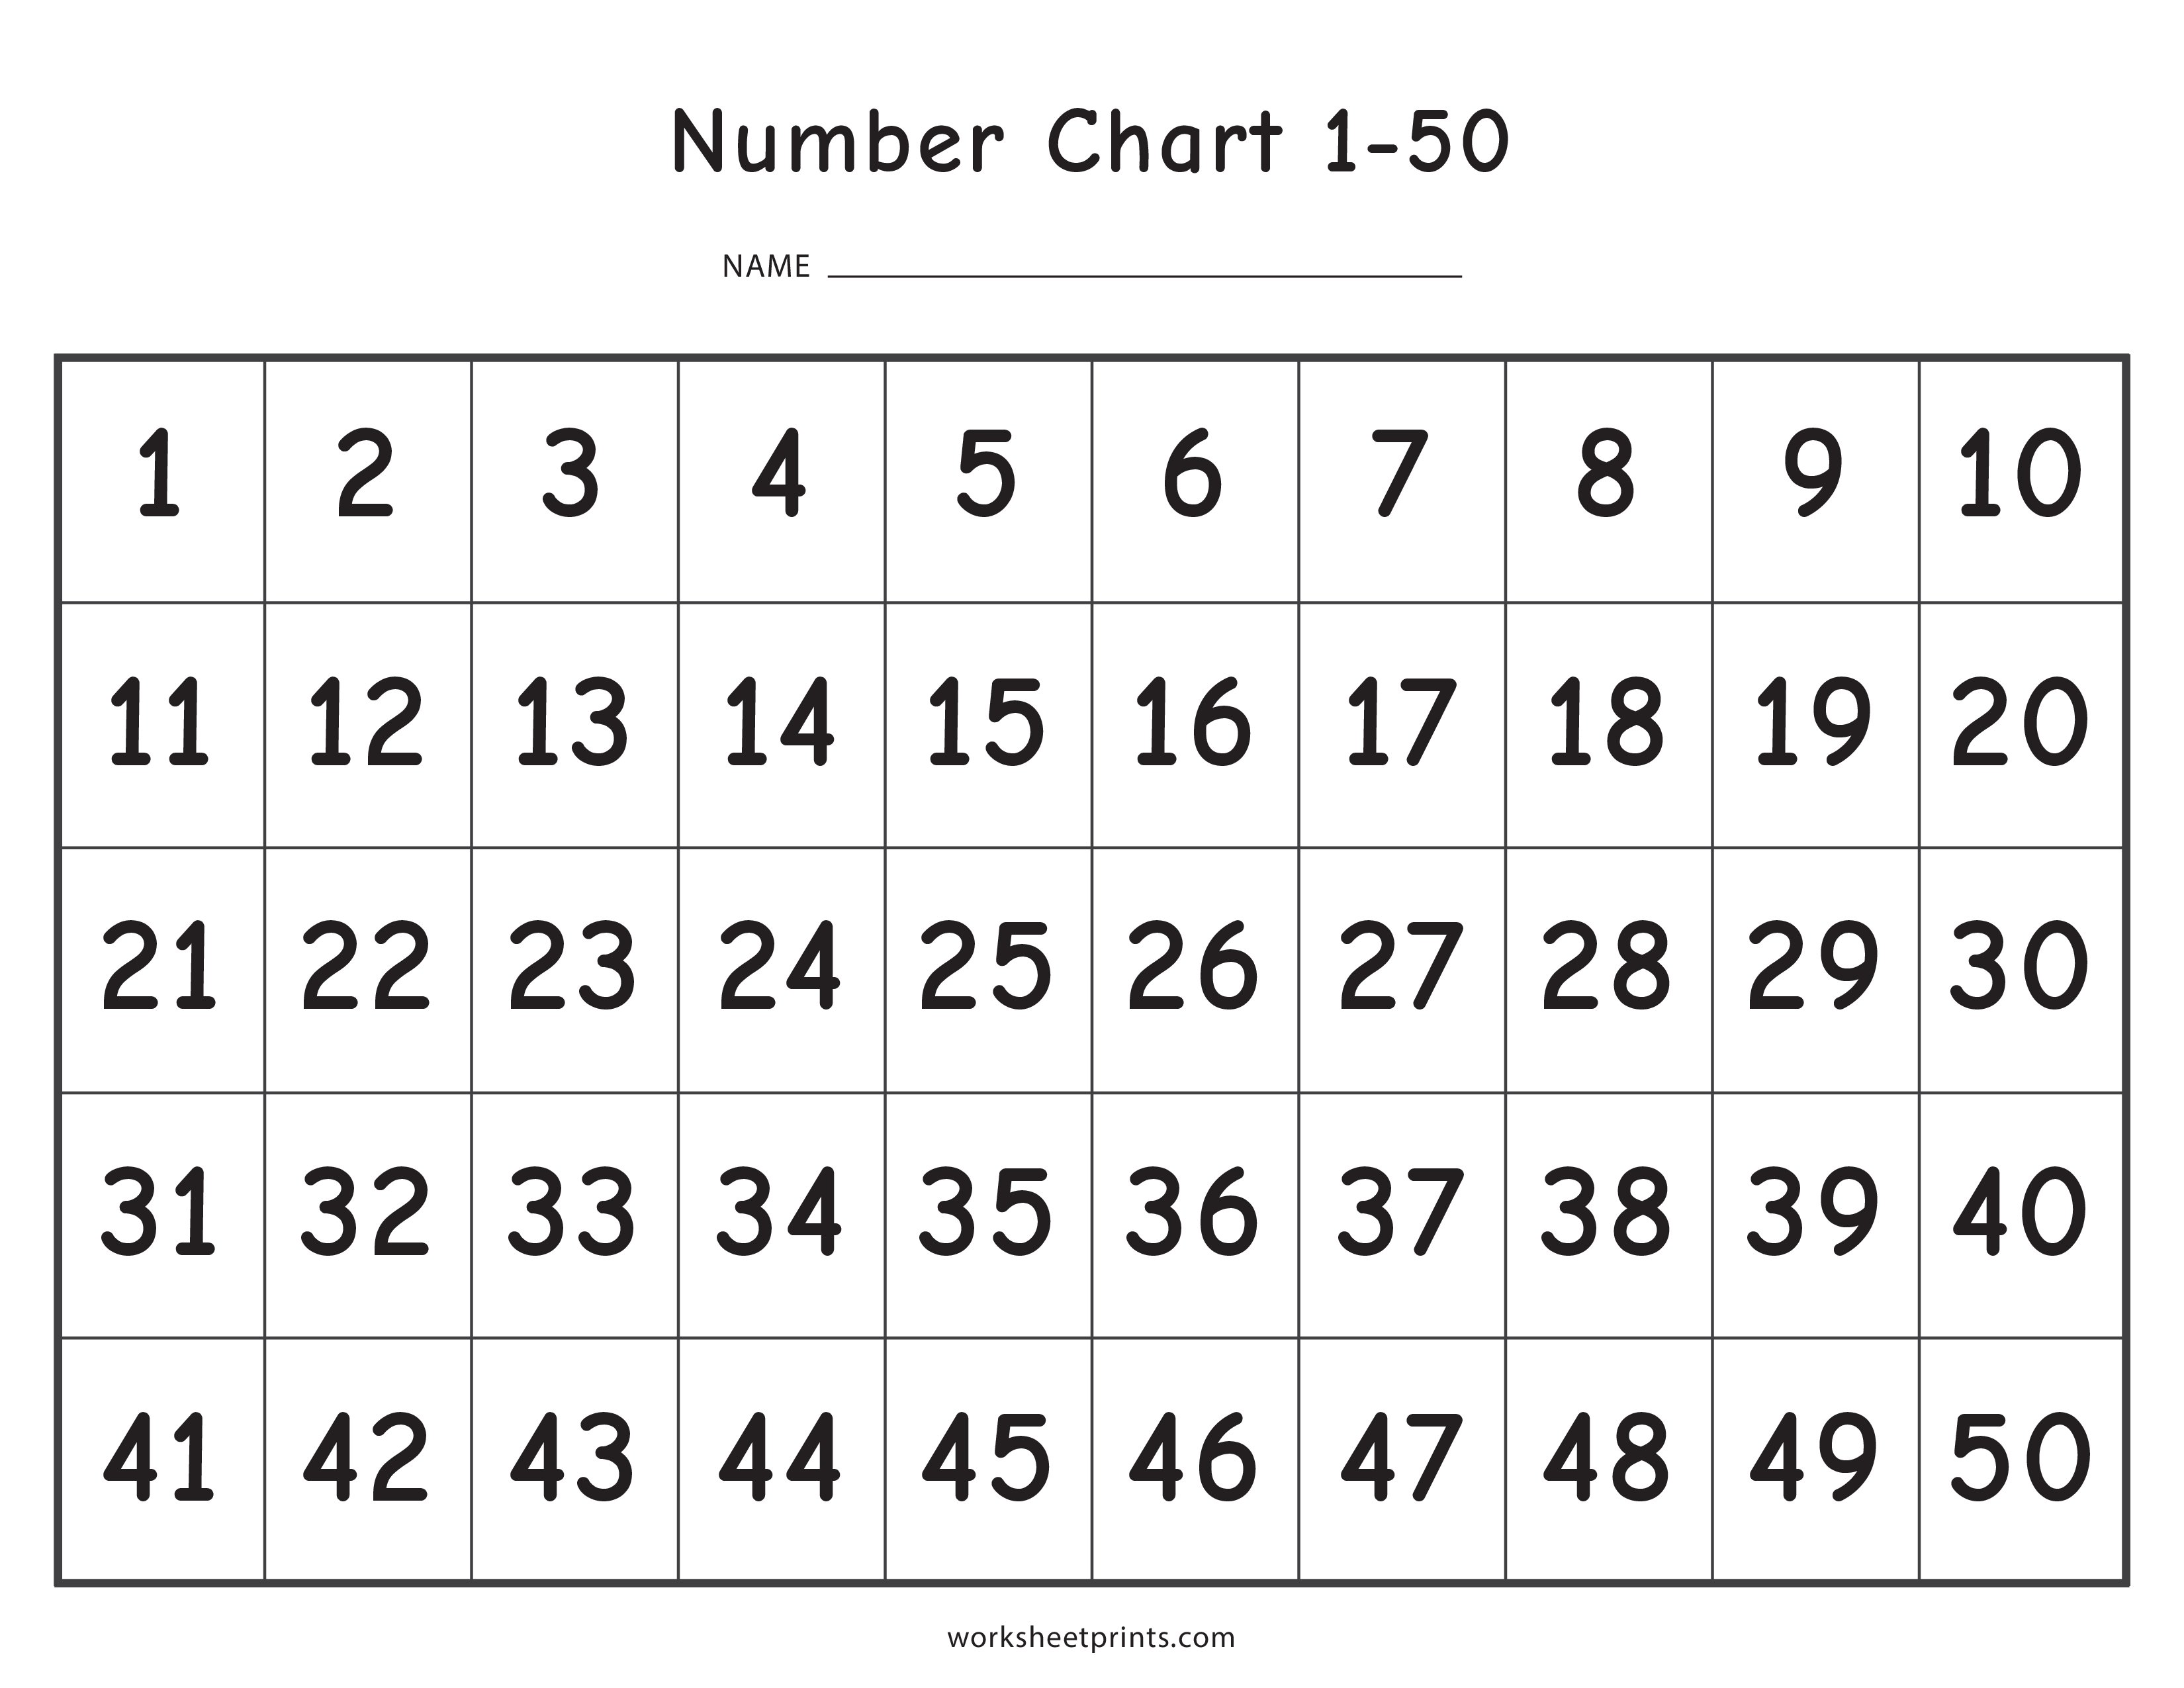 Number Charts 1-50